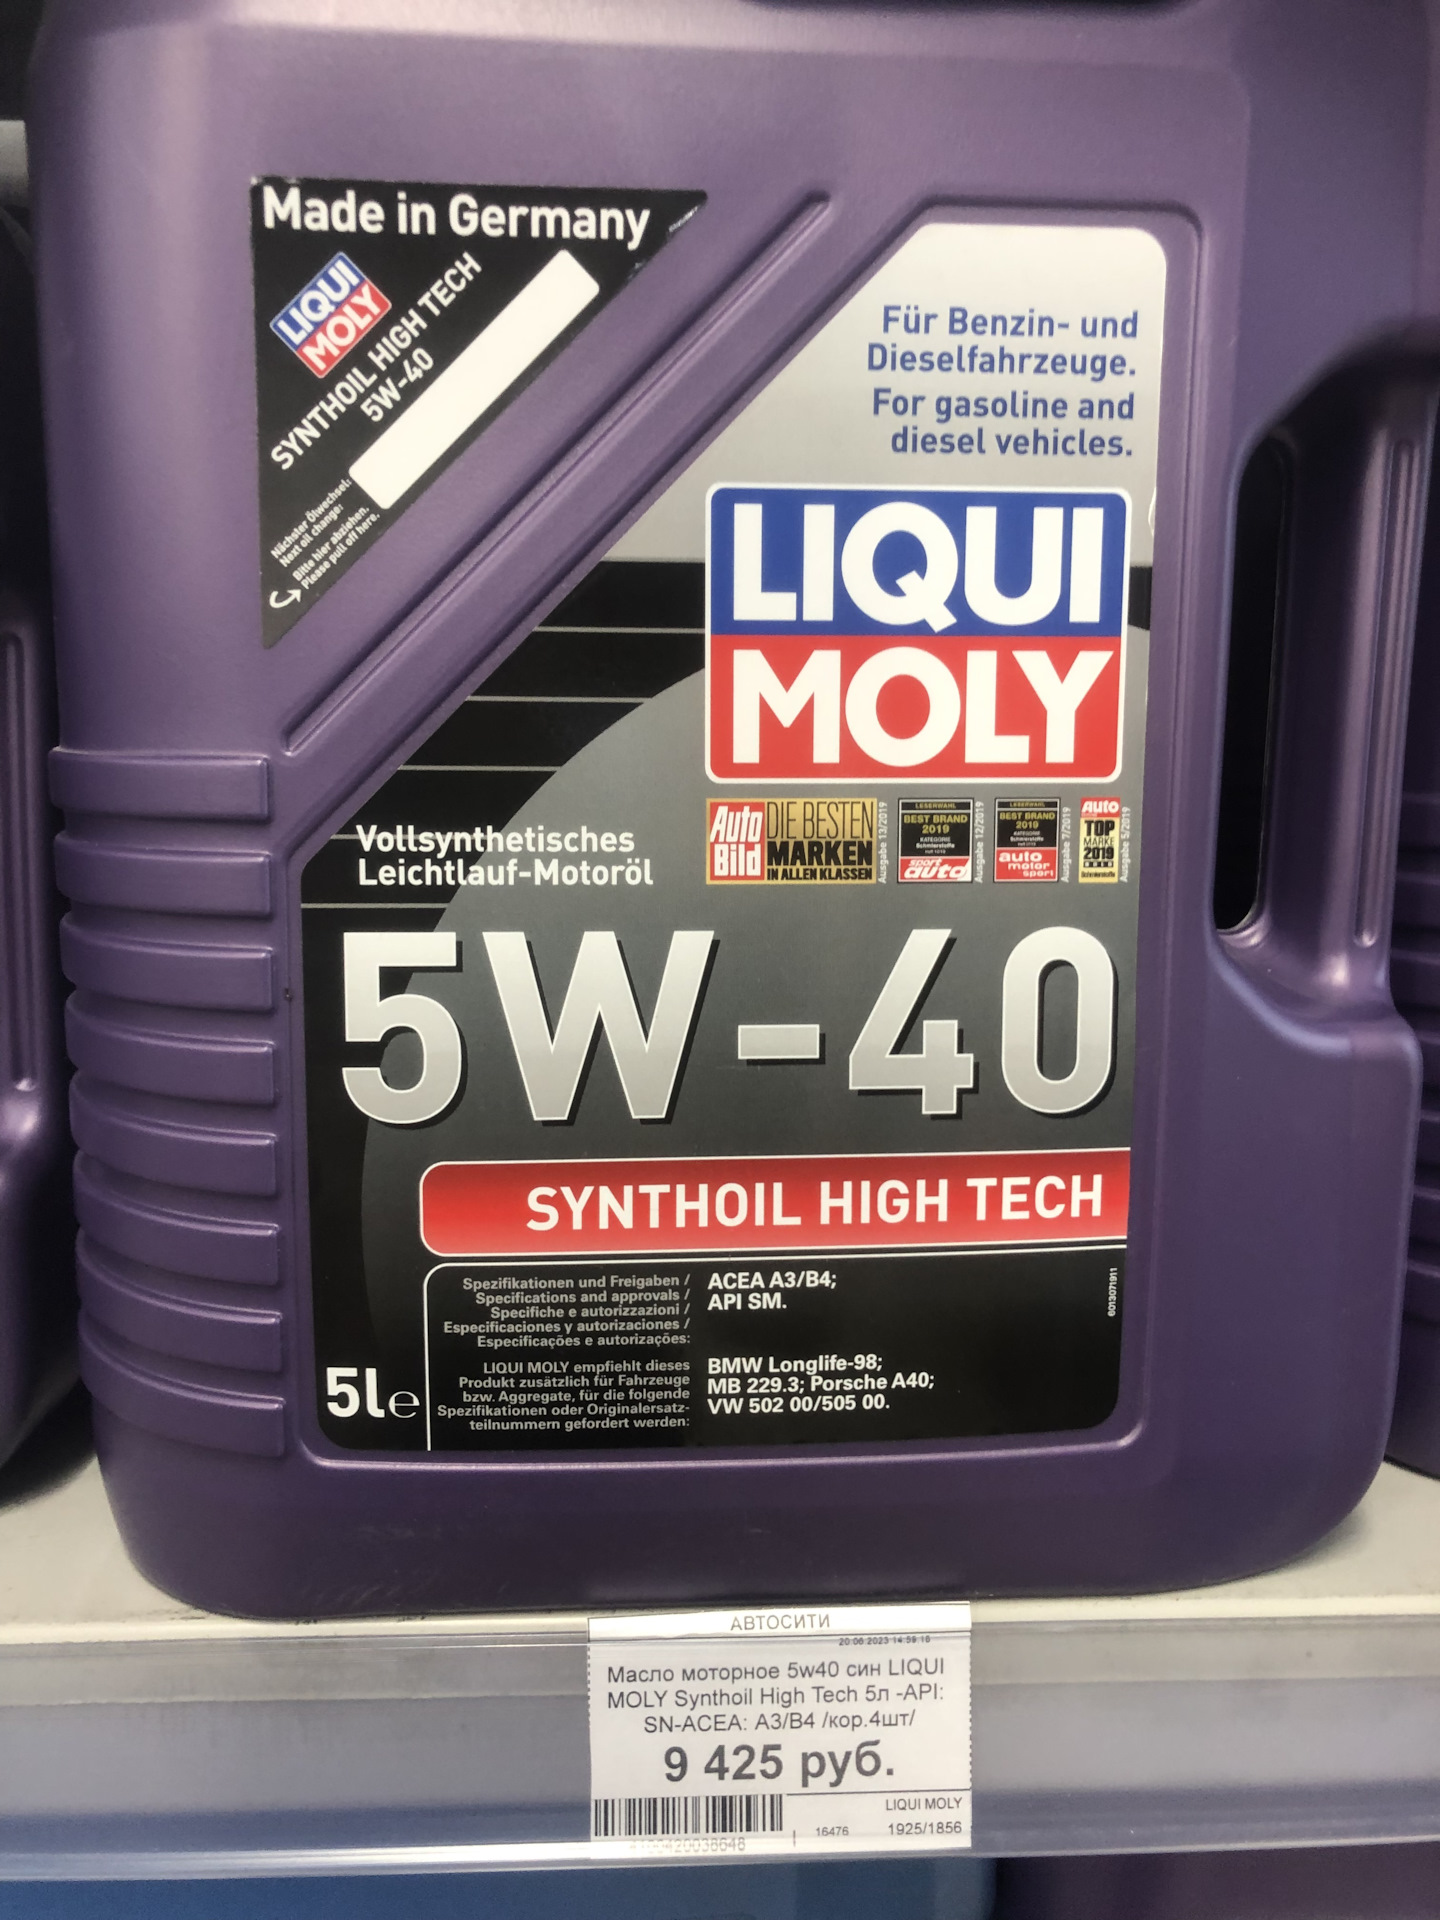 Moly synthoil high tech 5w 30. Liqui Moly Synthoil High Tech 5w-40. Liqui Moly 5w40 Synthoil High Tech 5л. Synthoil High Tech 5w-40. Synthoil High Tech 5w-40 1литр.